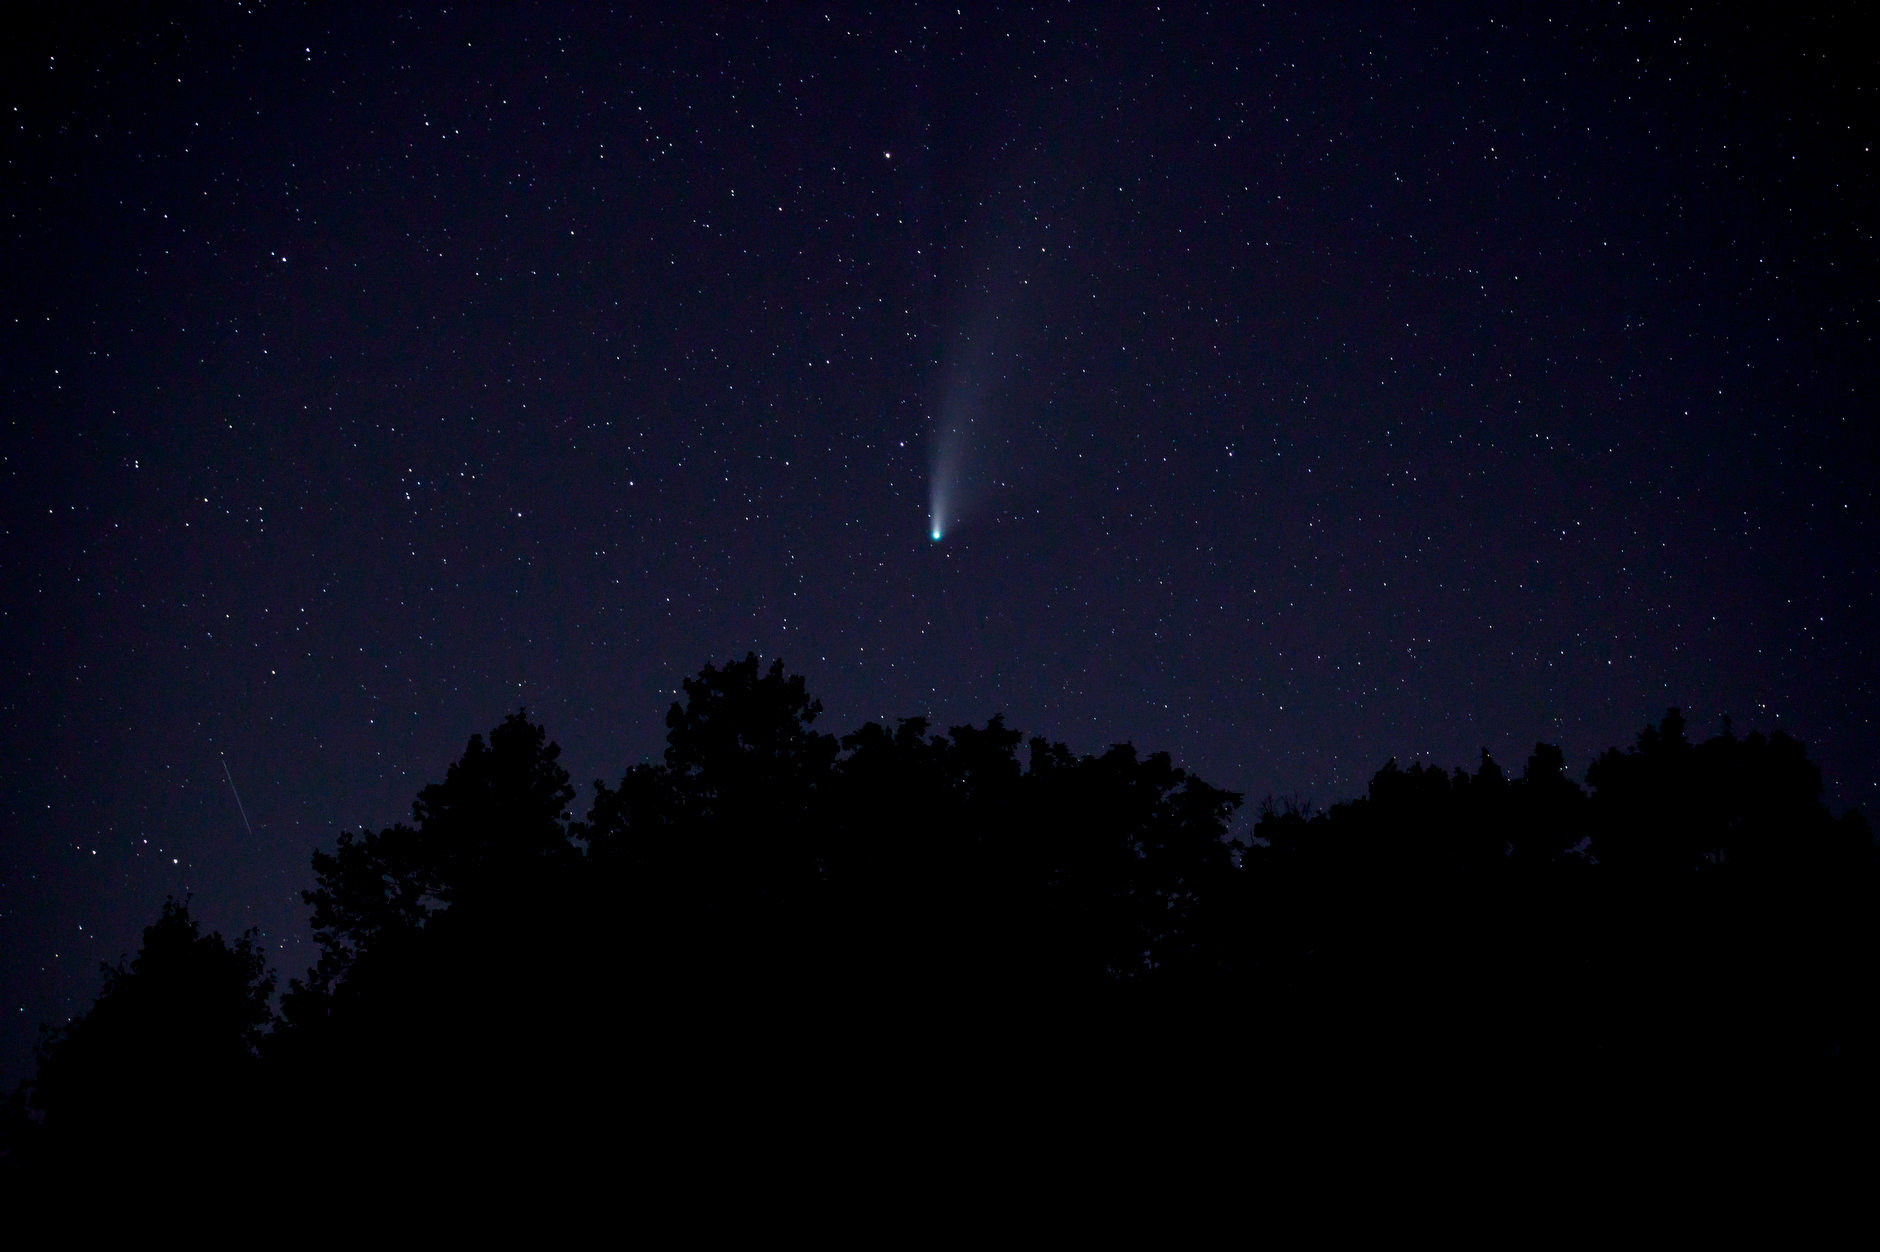 Comet NEOWISE is seen in the night sky near the Tulip Viaduct in rural Greene County, Indiana on Thursday, July 23, 2020. (Photo by James Brosher)